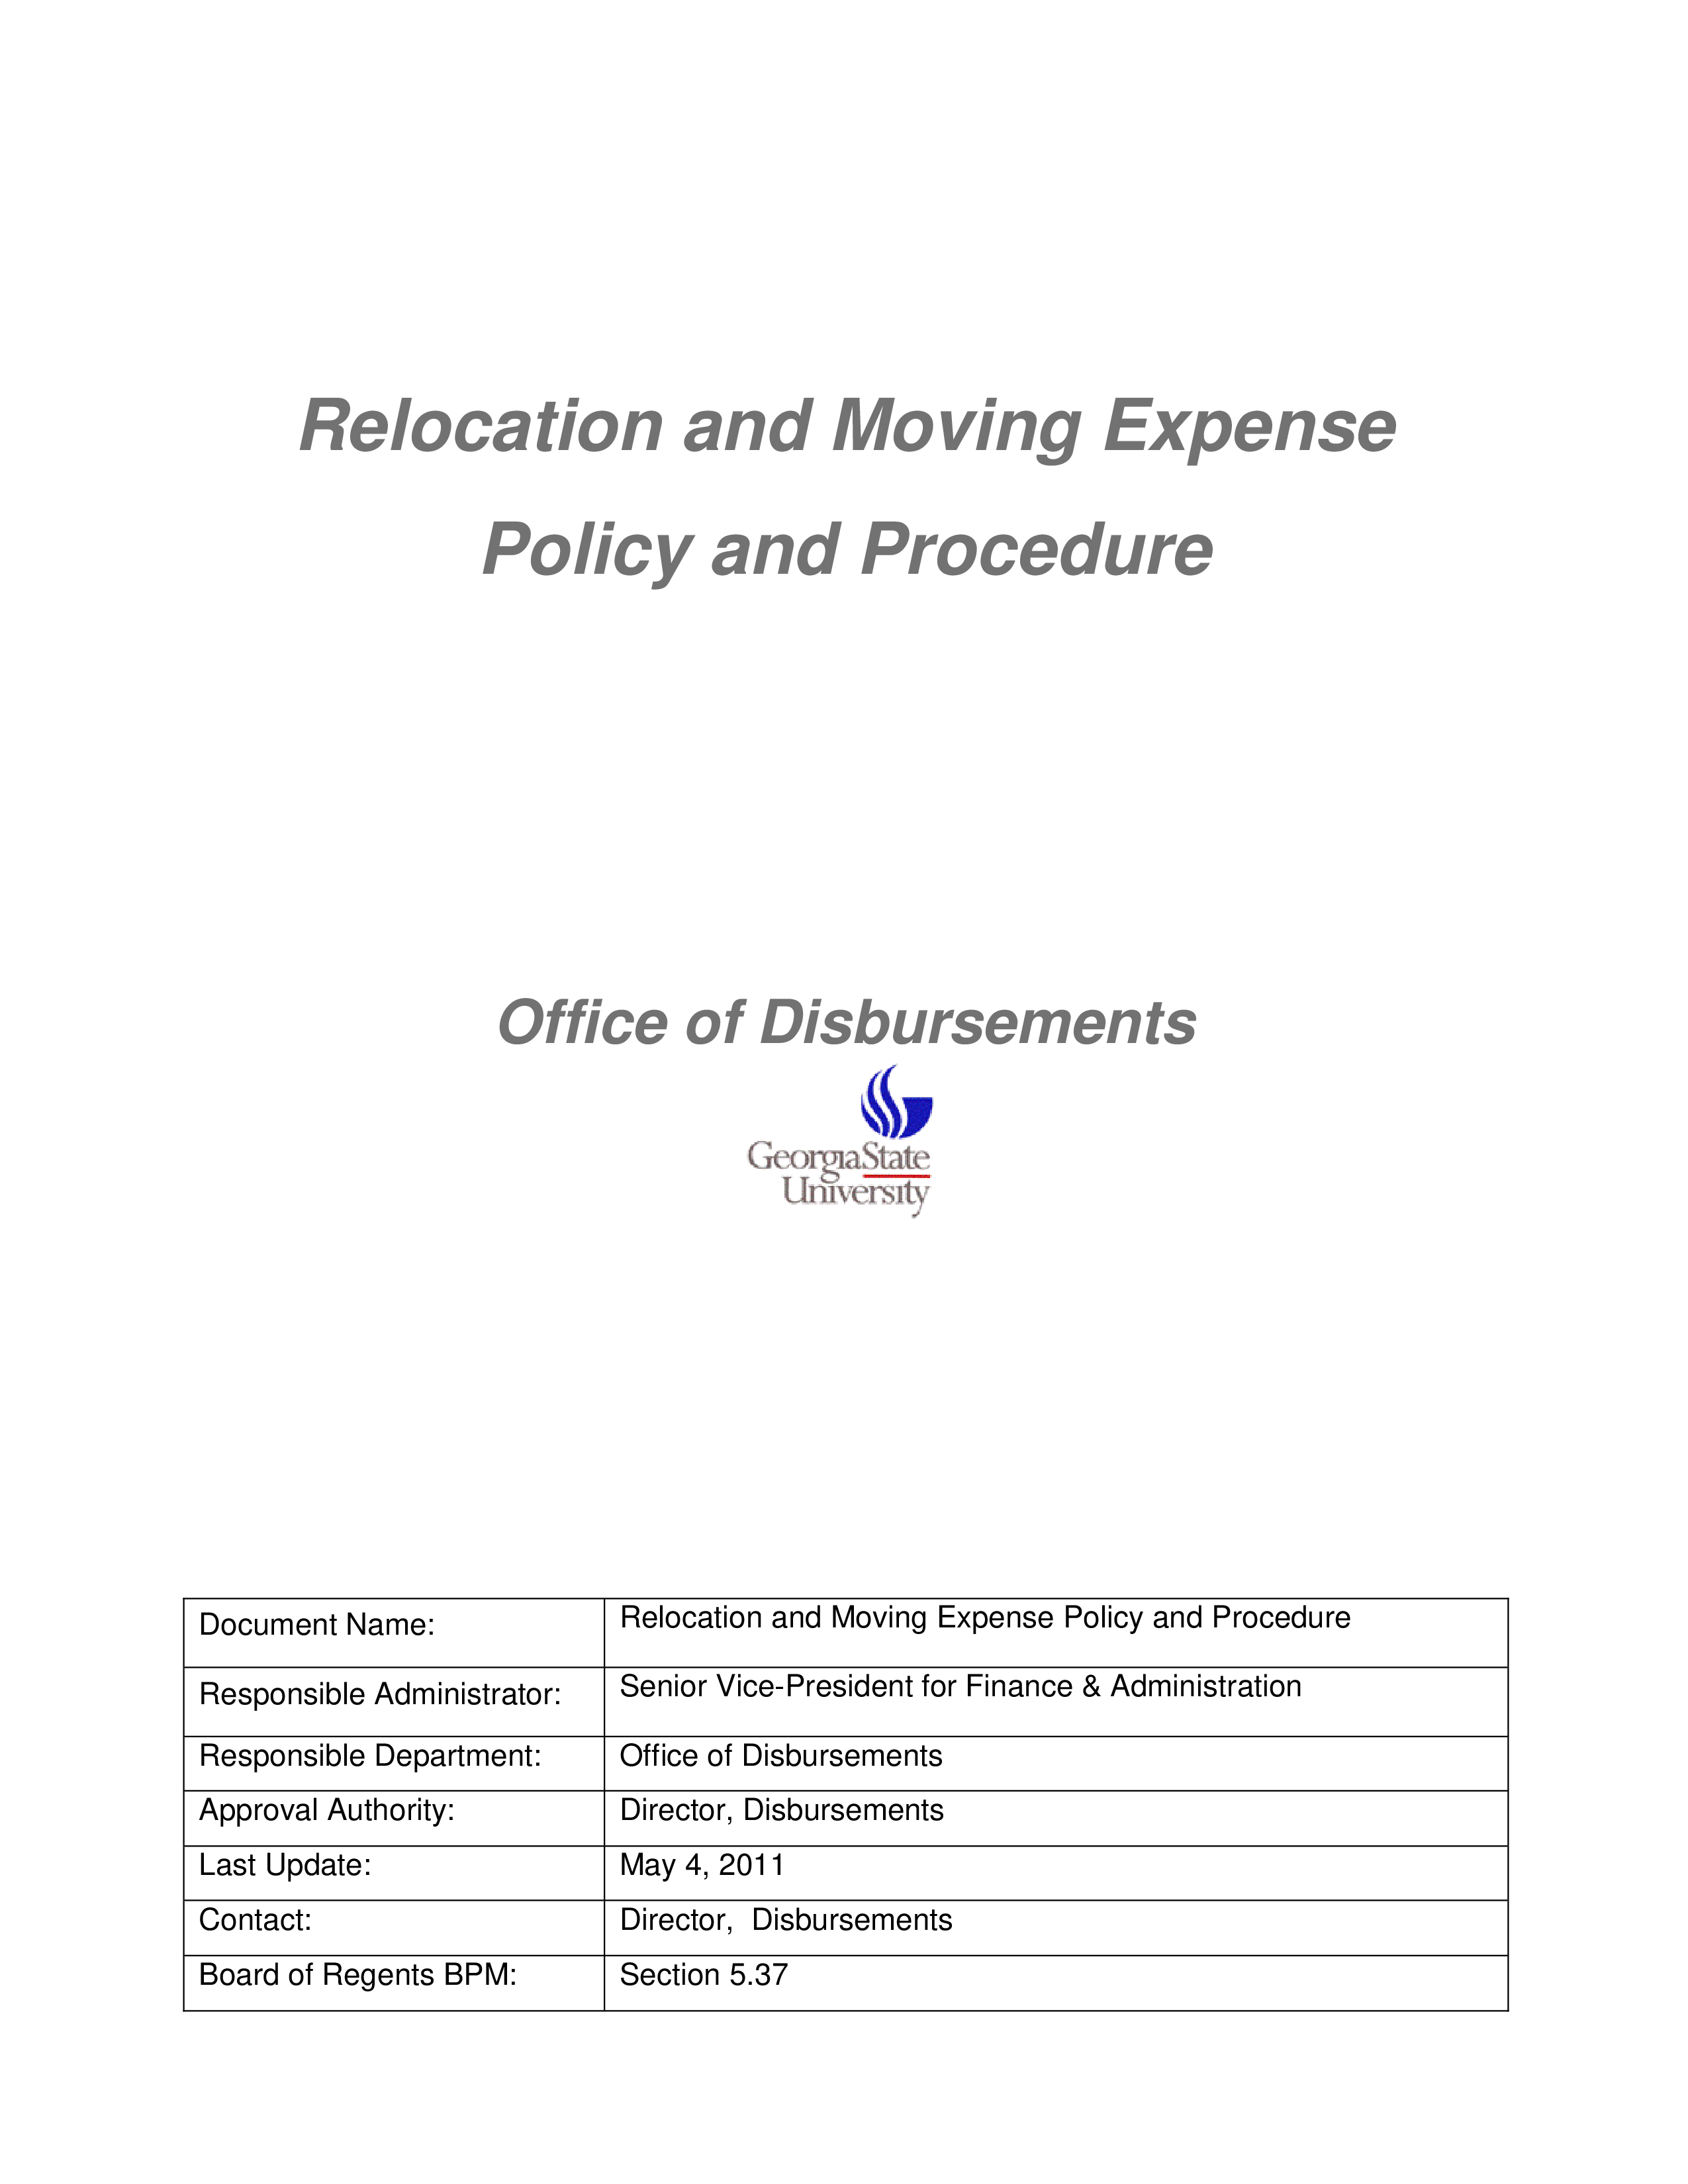 Relocation And Moving Expense Policy And Procedure main image